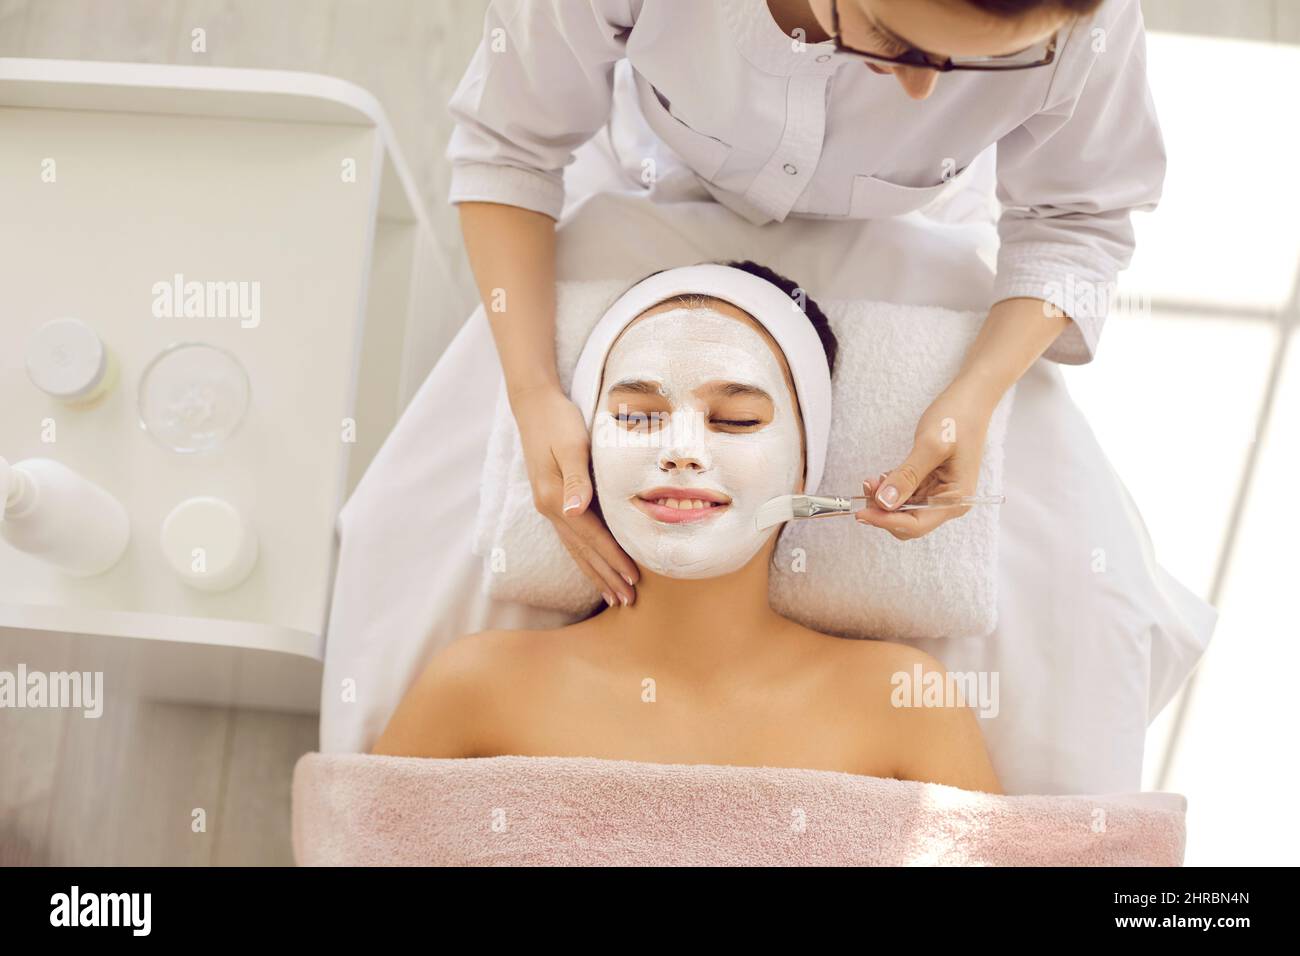 Portrait of satisfied smiling female client enjoying skin care procedure in spa salon. Stock Photo